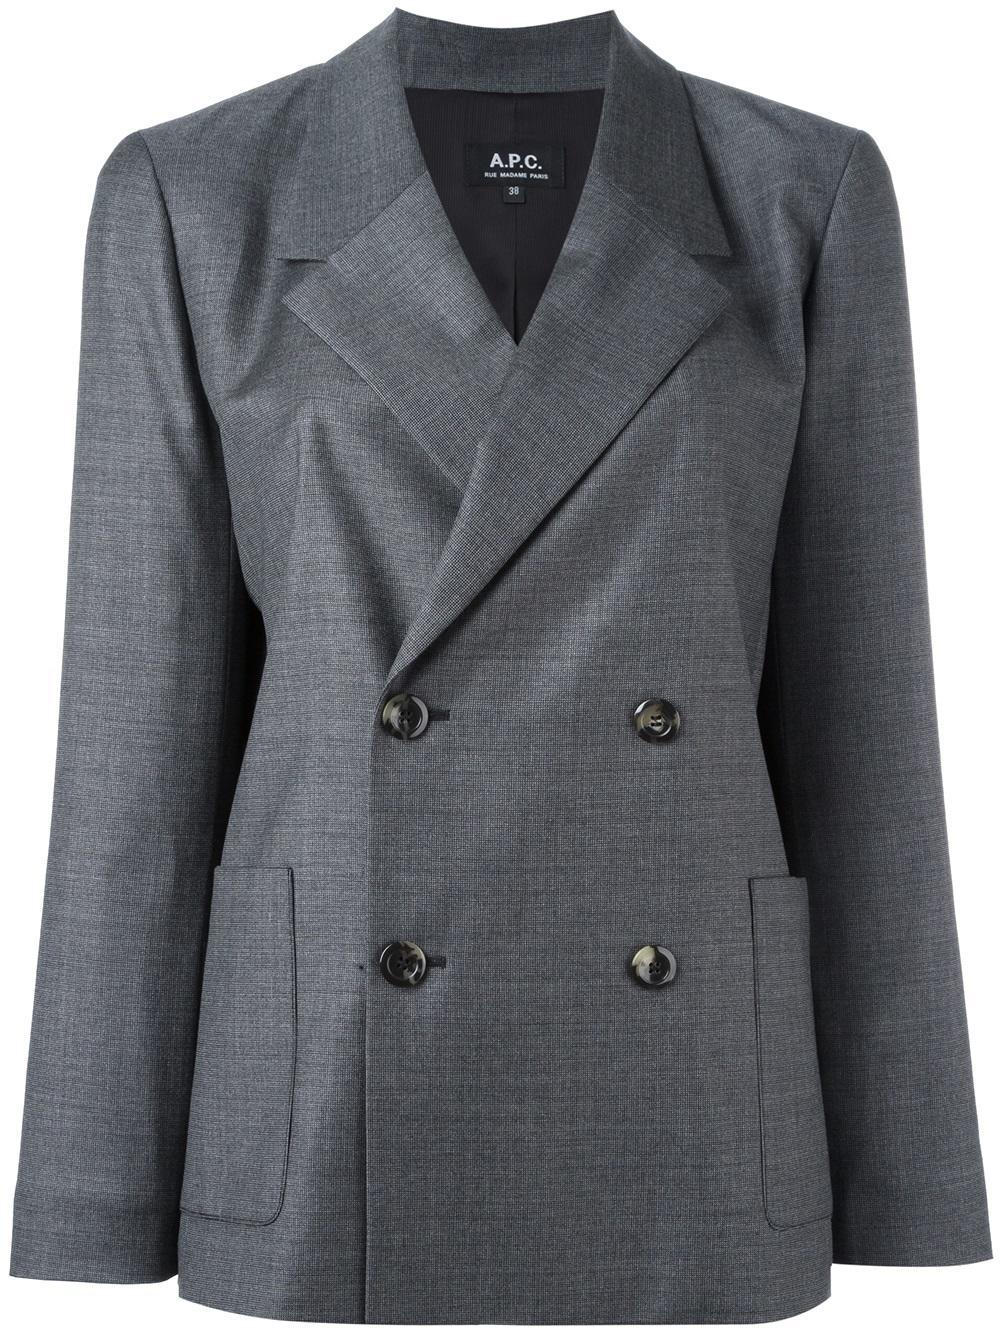 Lyst - A.P.C. Double Breasted Blazer in Gray